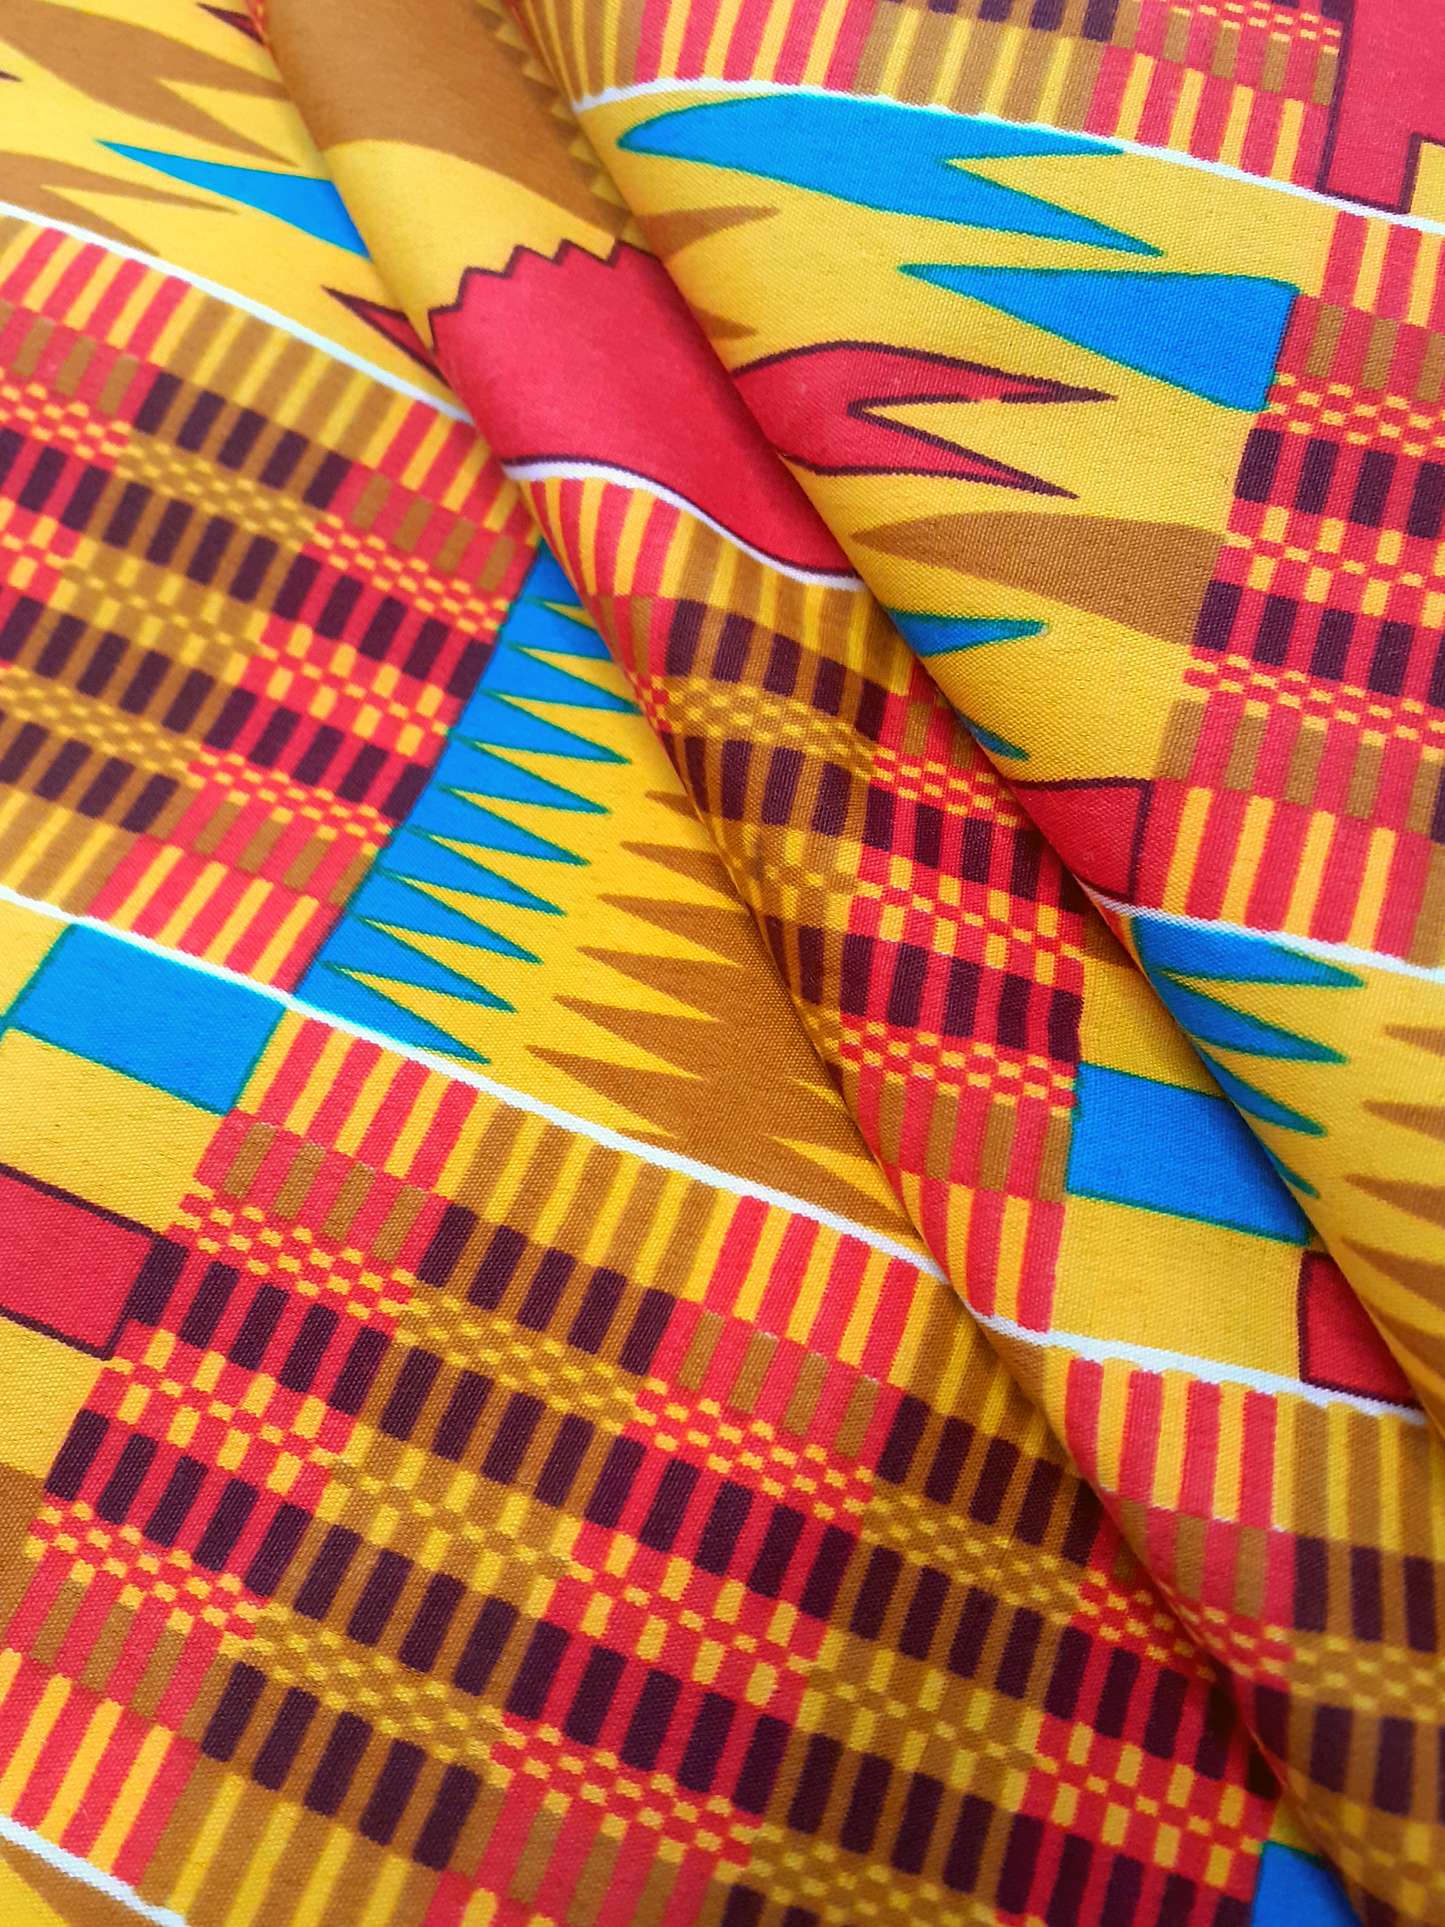 African Fabrics By the Yard - Kente - Classic #2 Marigold, Brown, Hot Blue, and Red